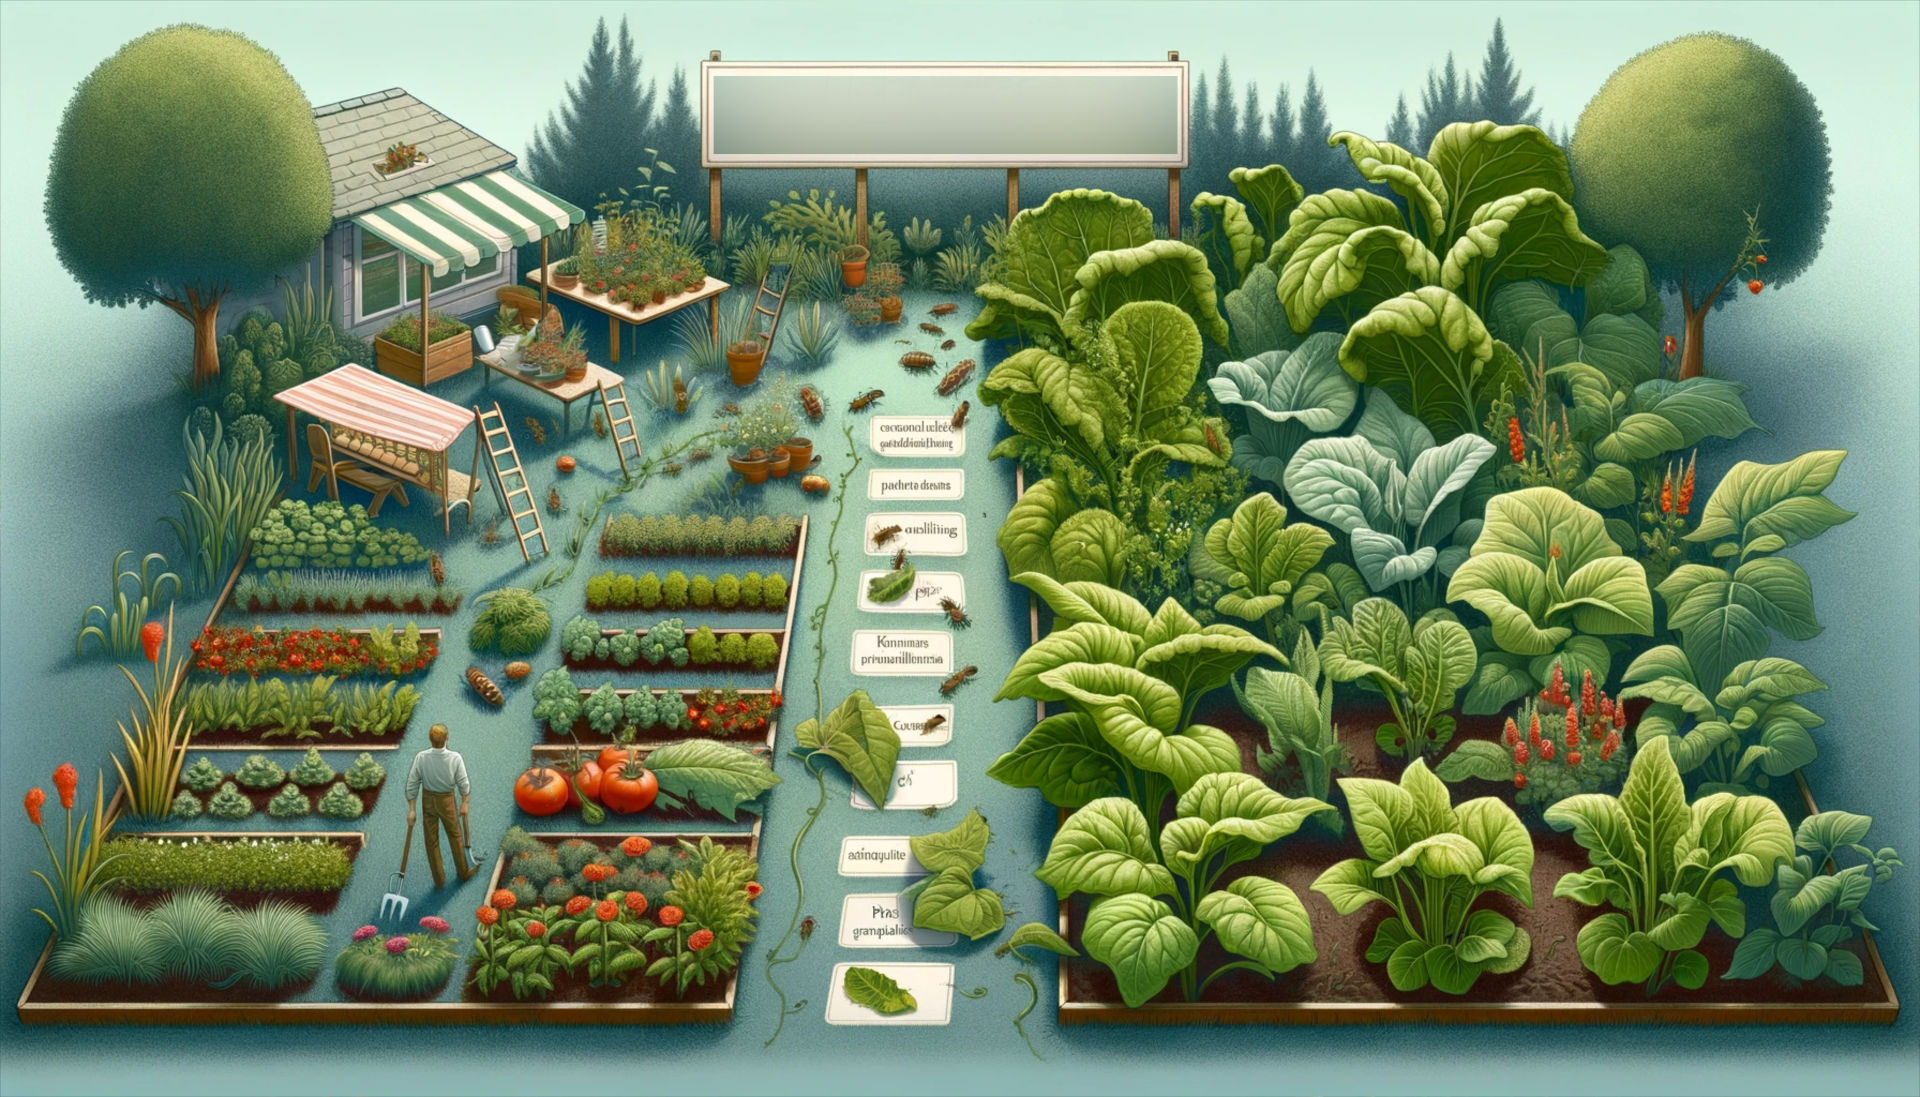 A garden scene depicting 'Potential Challenges and Pitfalls' in companion planting. The image should subtly illustrate common issues like overcrowding, improper plant pairing, and pest infestations. Show a section of the garden struggling with these challenges, with plants looking less vibrant and slightly wilted. Include visual cues like pests on leaves, and plants competing for space and resources. This scene should contrast with a healthier section of the garden, emphasising the importance of proper companion planting practices.